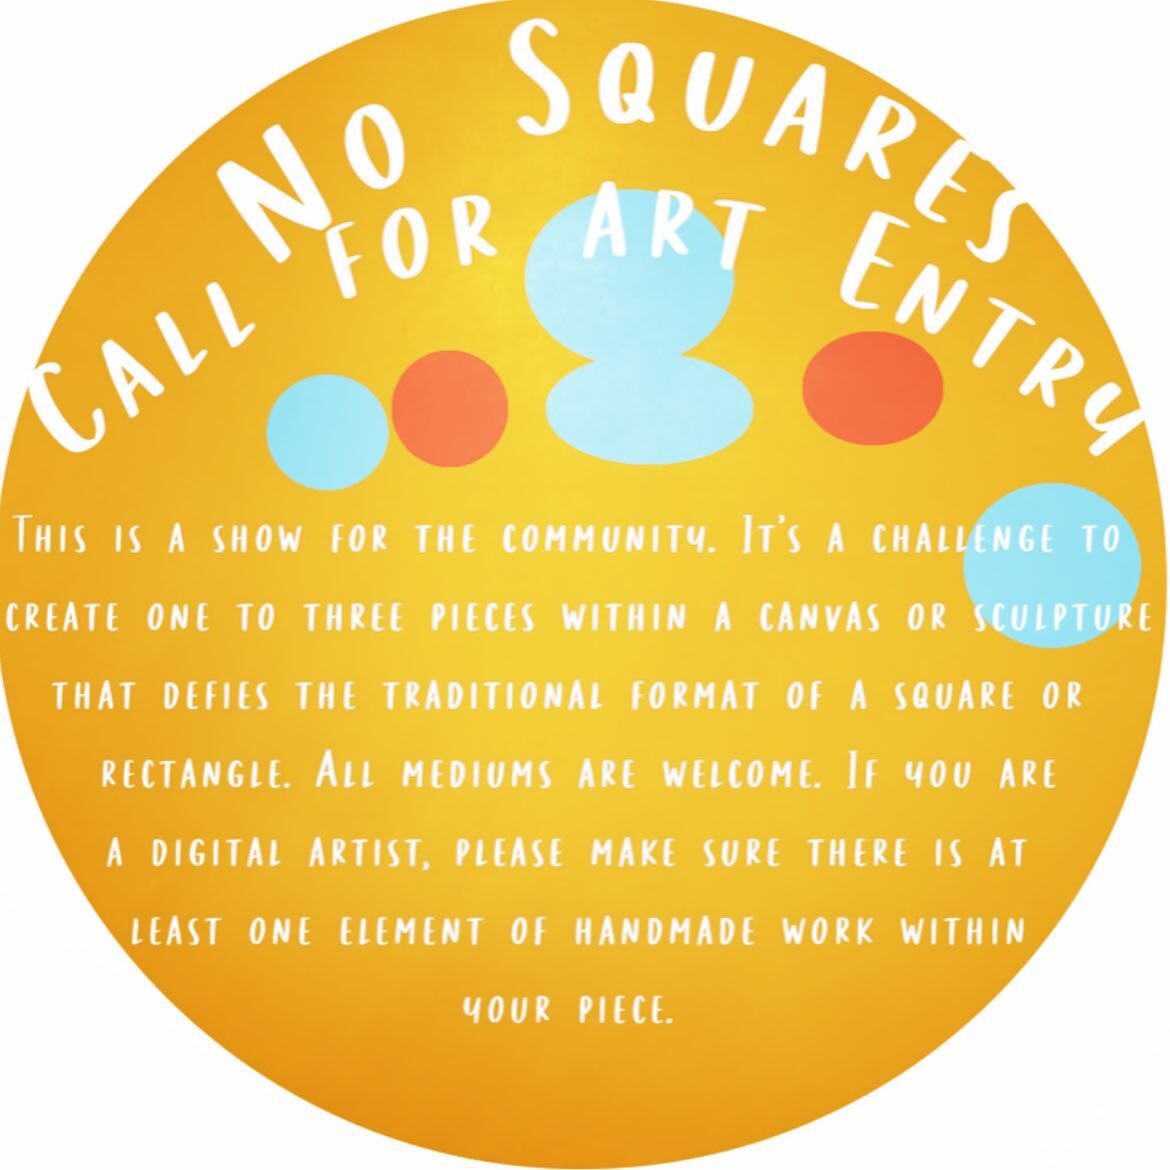 Guys!! It&rsquo;s time for our summer community show!! ONE WEEK LEFT BEFORE DROP OFF DATE!! 

No squares means no canvas or surfaces shaped as a square or rectangle. These shapes can be used within your piece(s), but your surface must be round, hexag